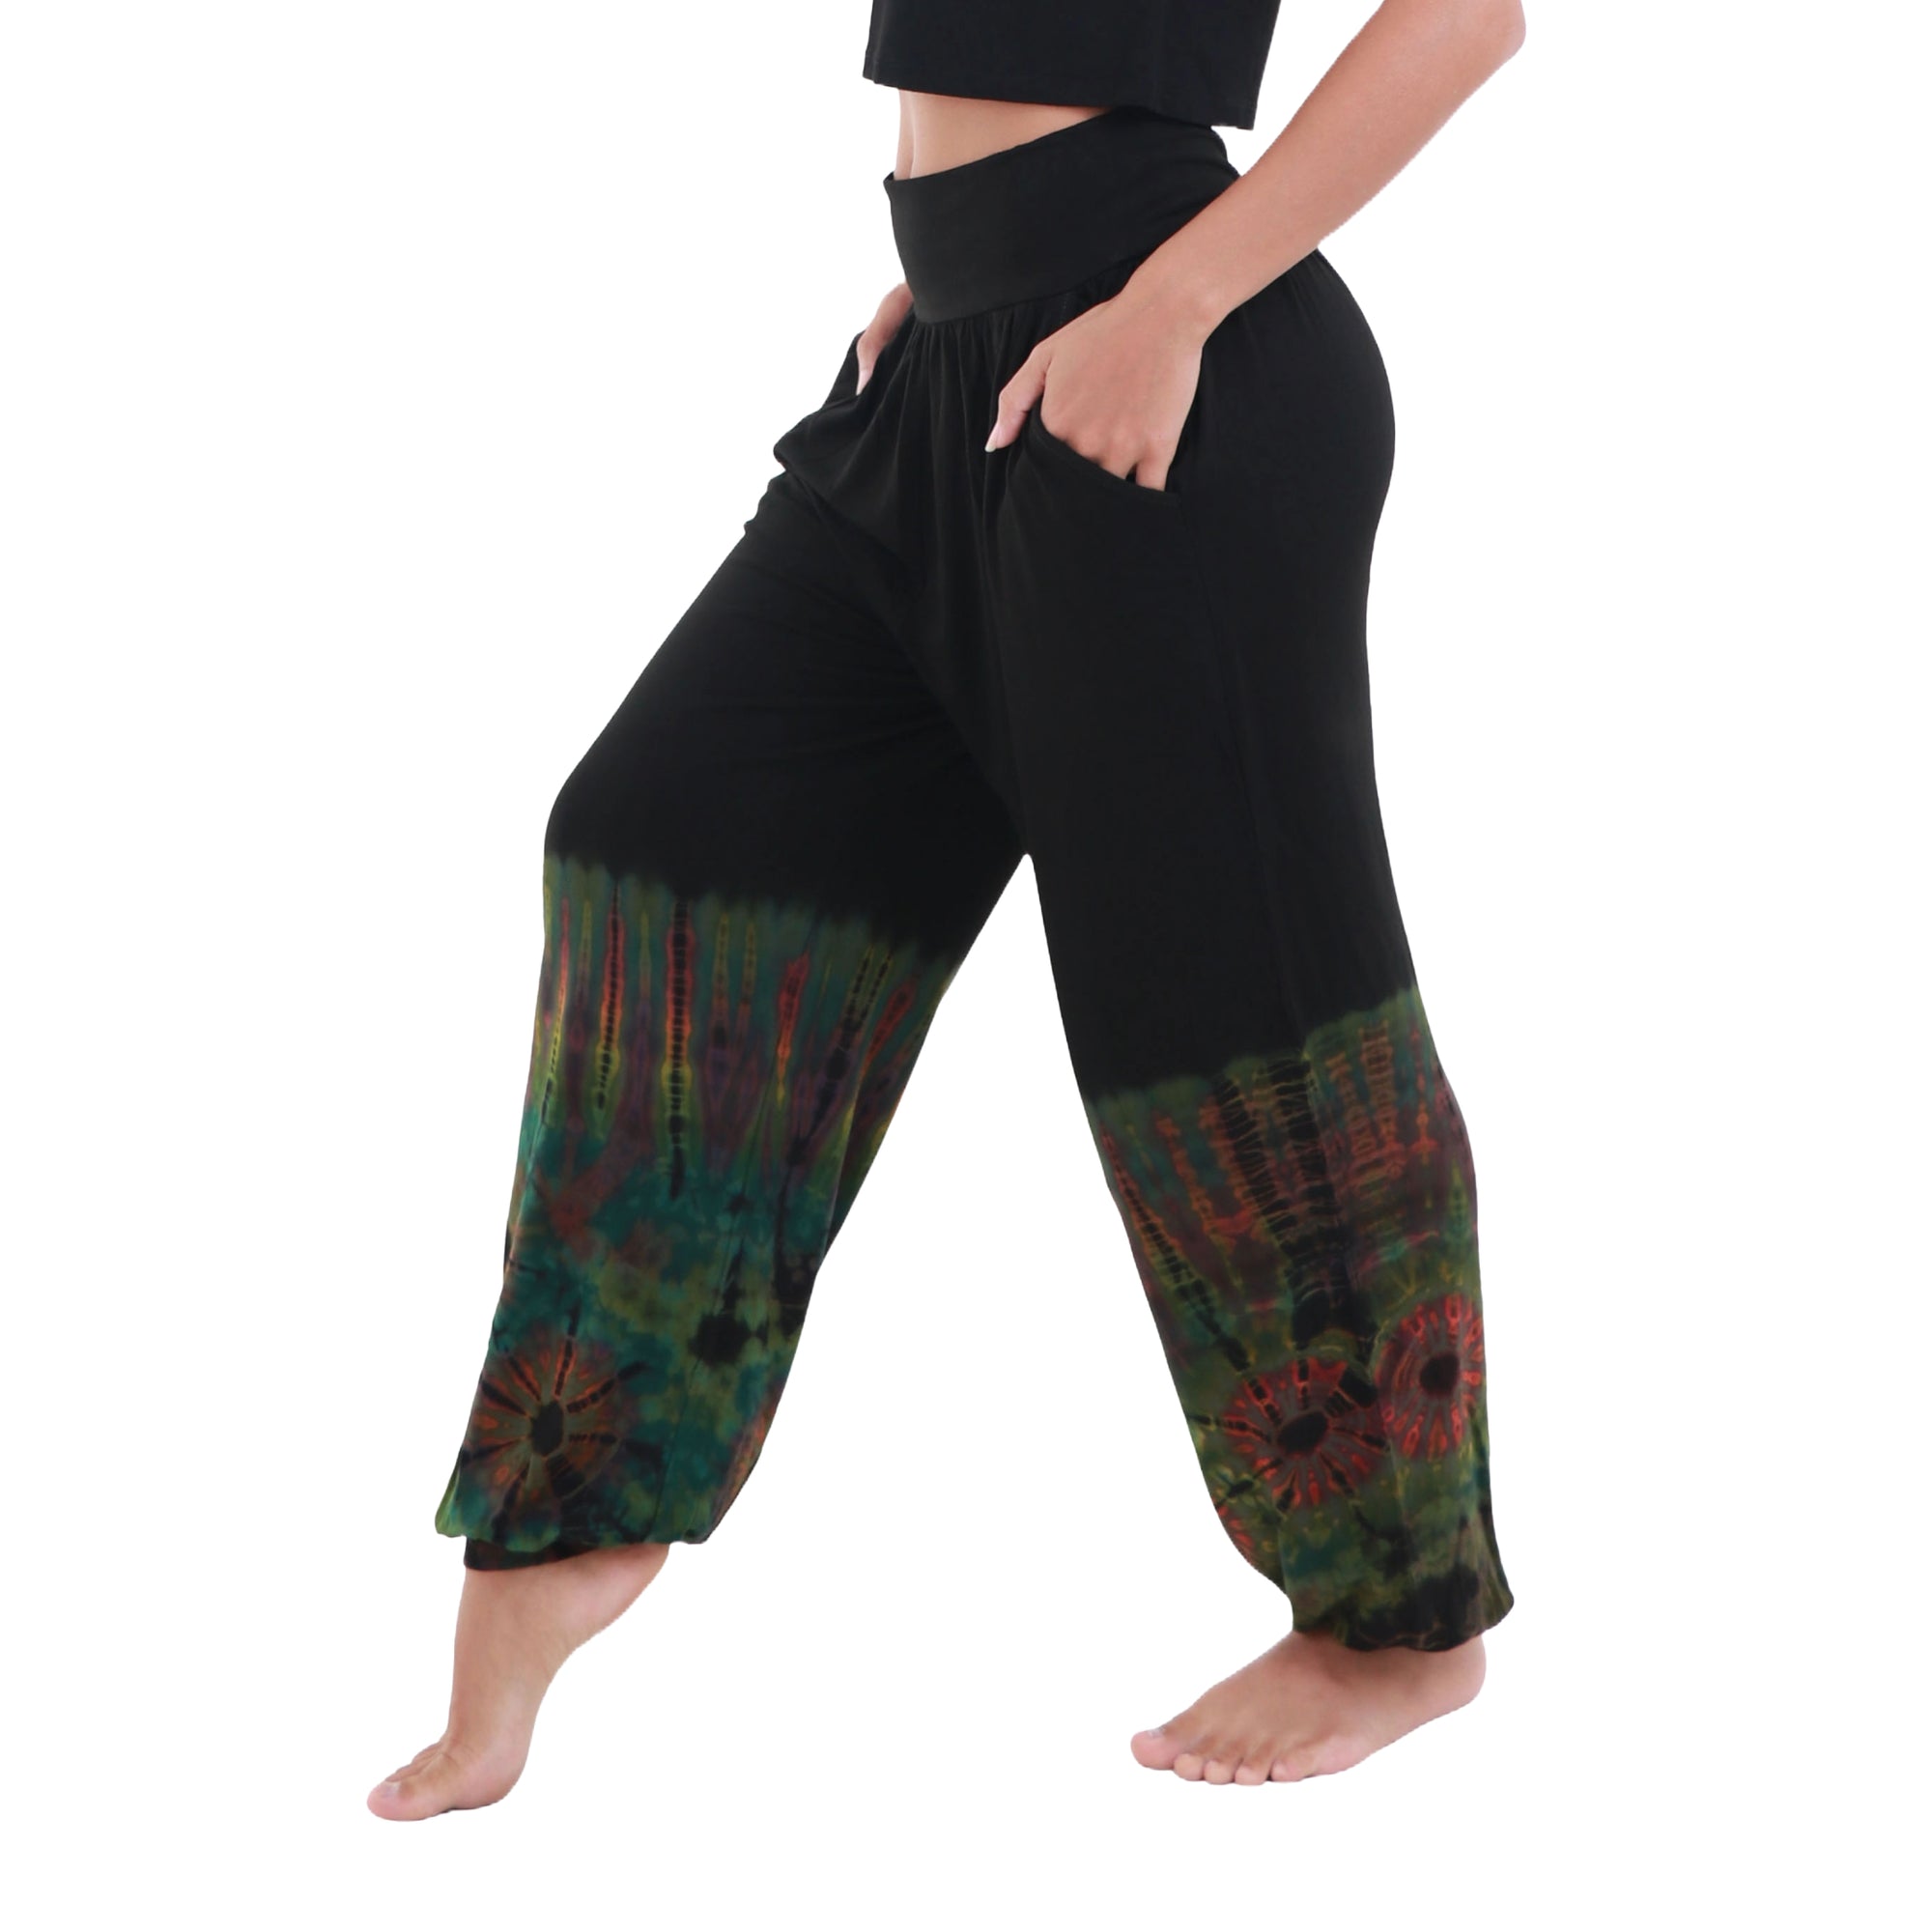 elastic waist pants | made by hand products from malisun | one size 